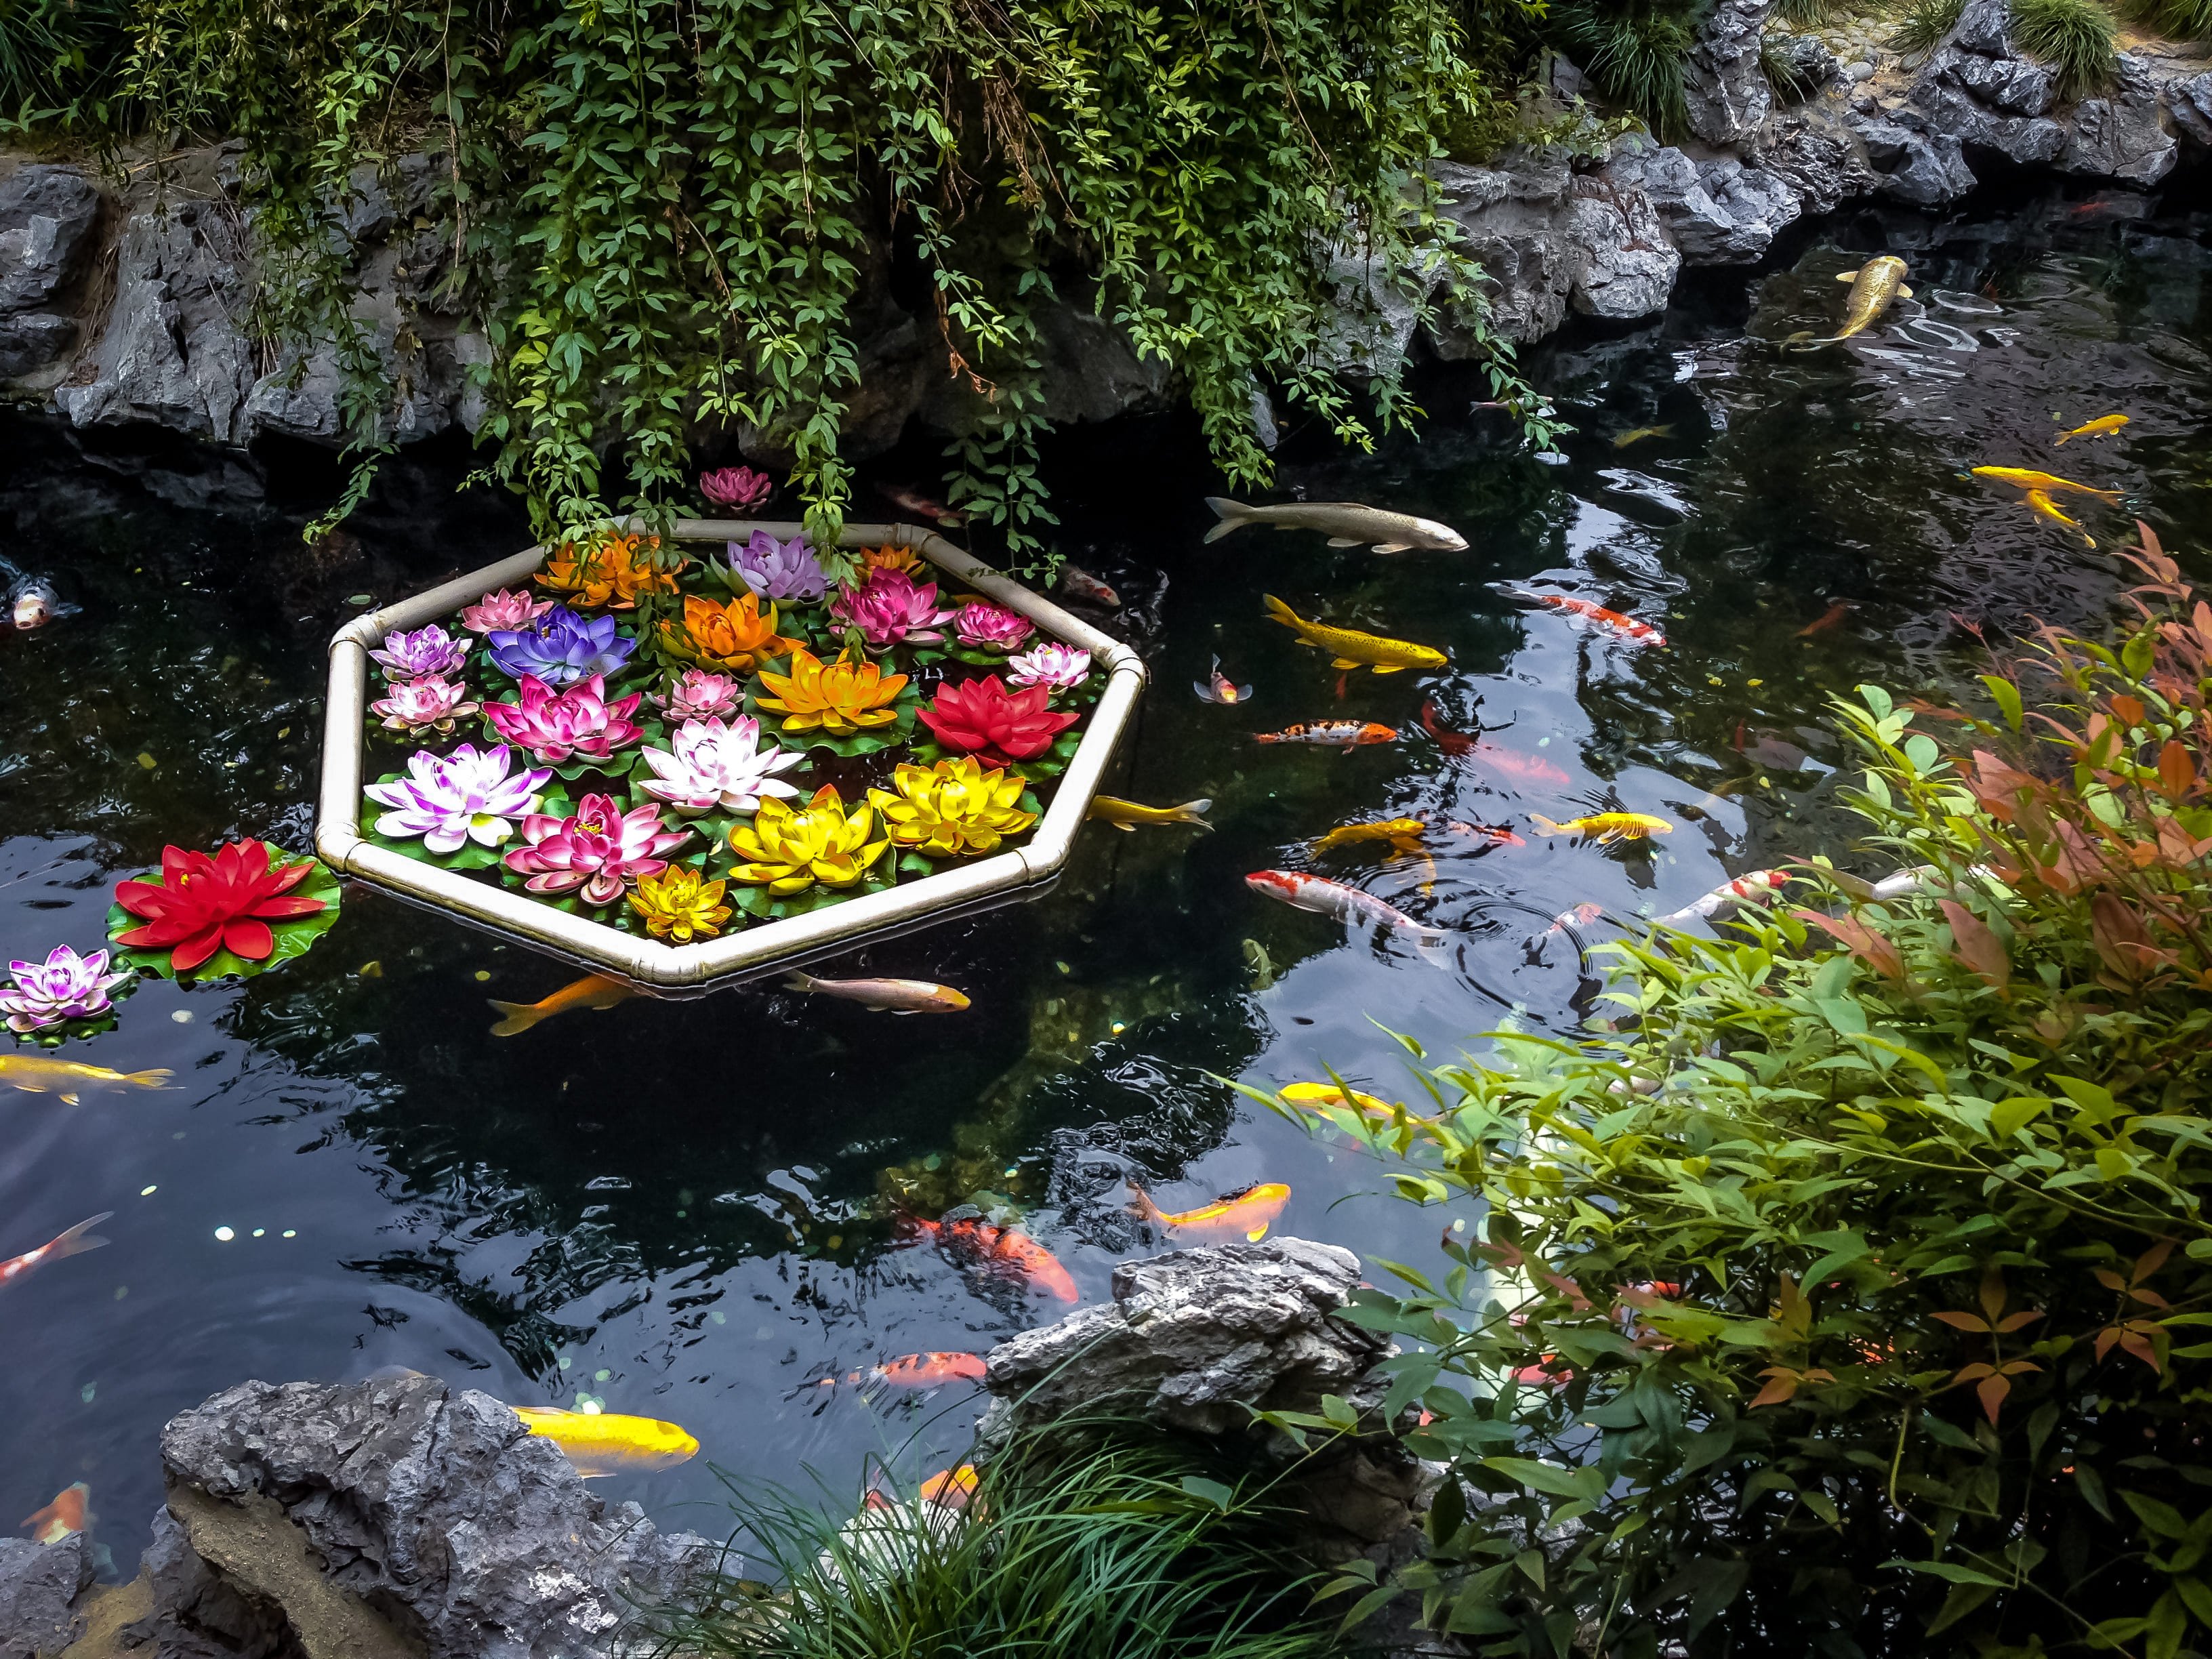 Fish and flowers in a pond